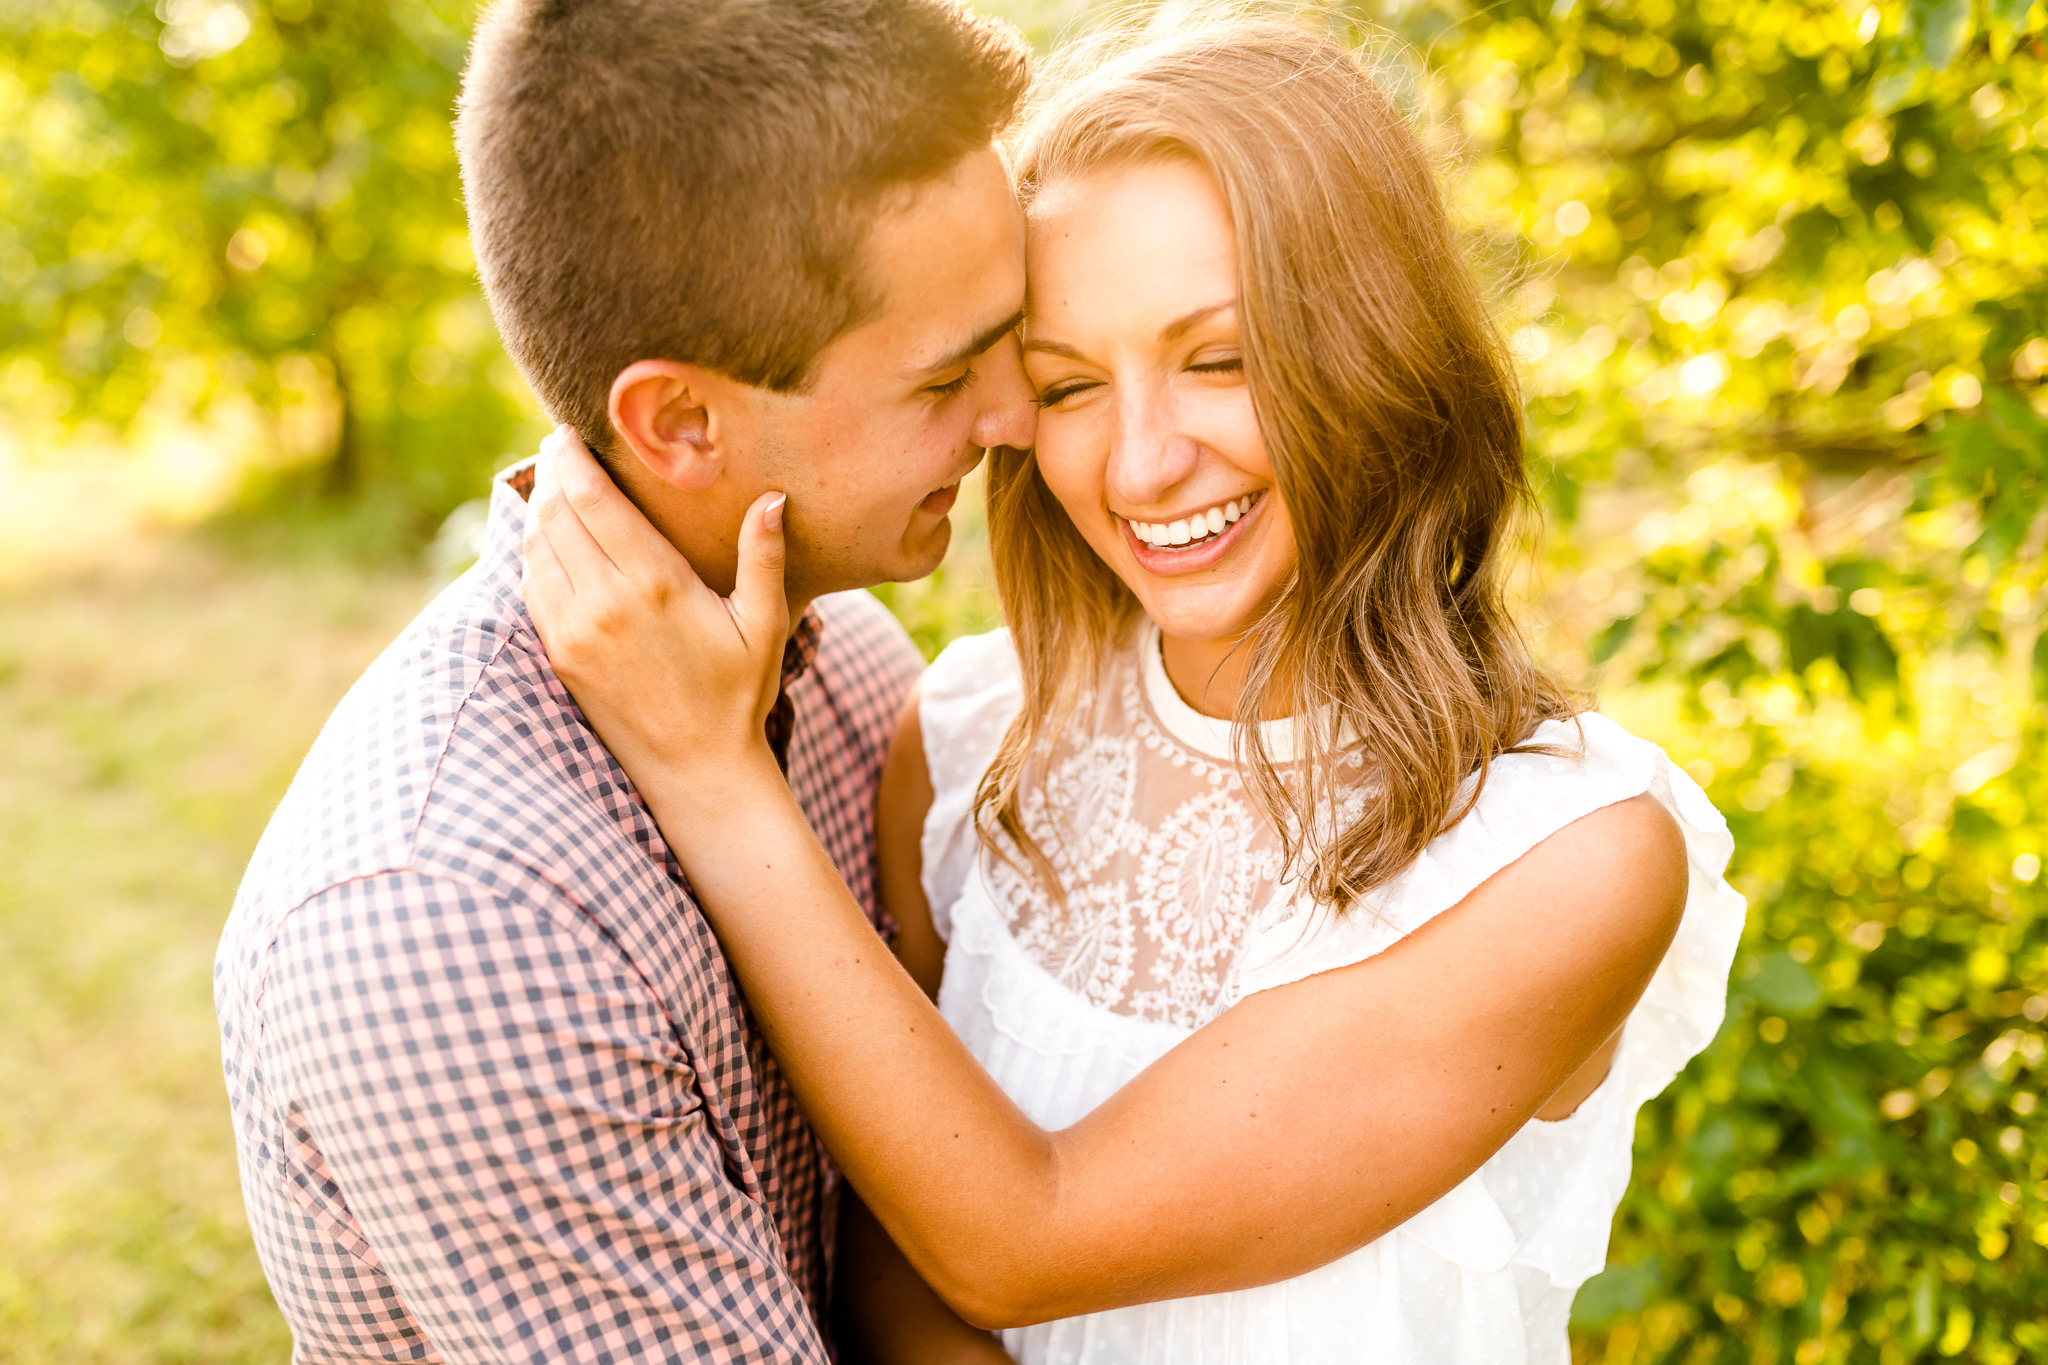 sunset engagement session at Comlara Park in Bloomington IL with Caitlin and Luke Photography